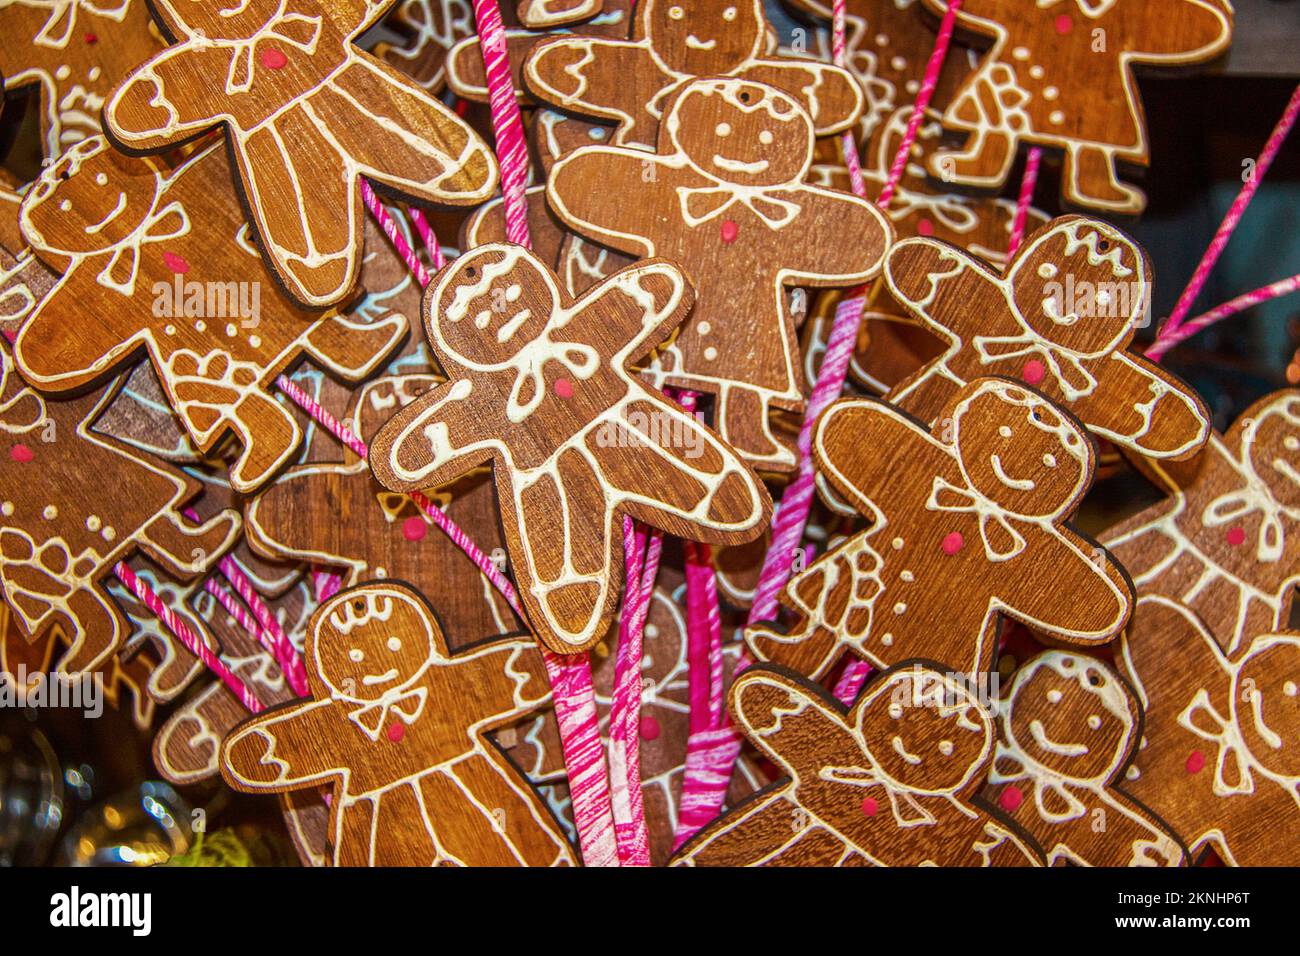 Holiday background - wooden gingerbread men on candycane sticks all piled up on each other - selective focus on foreground with som bokeh Stock Photo